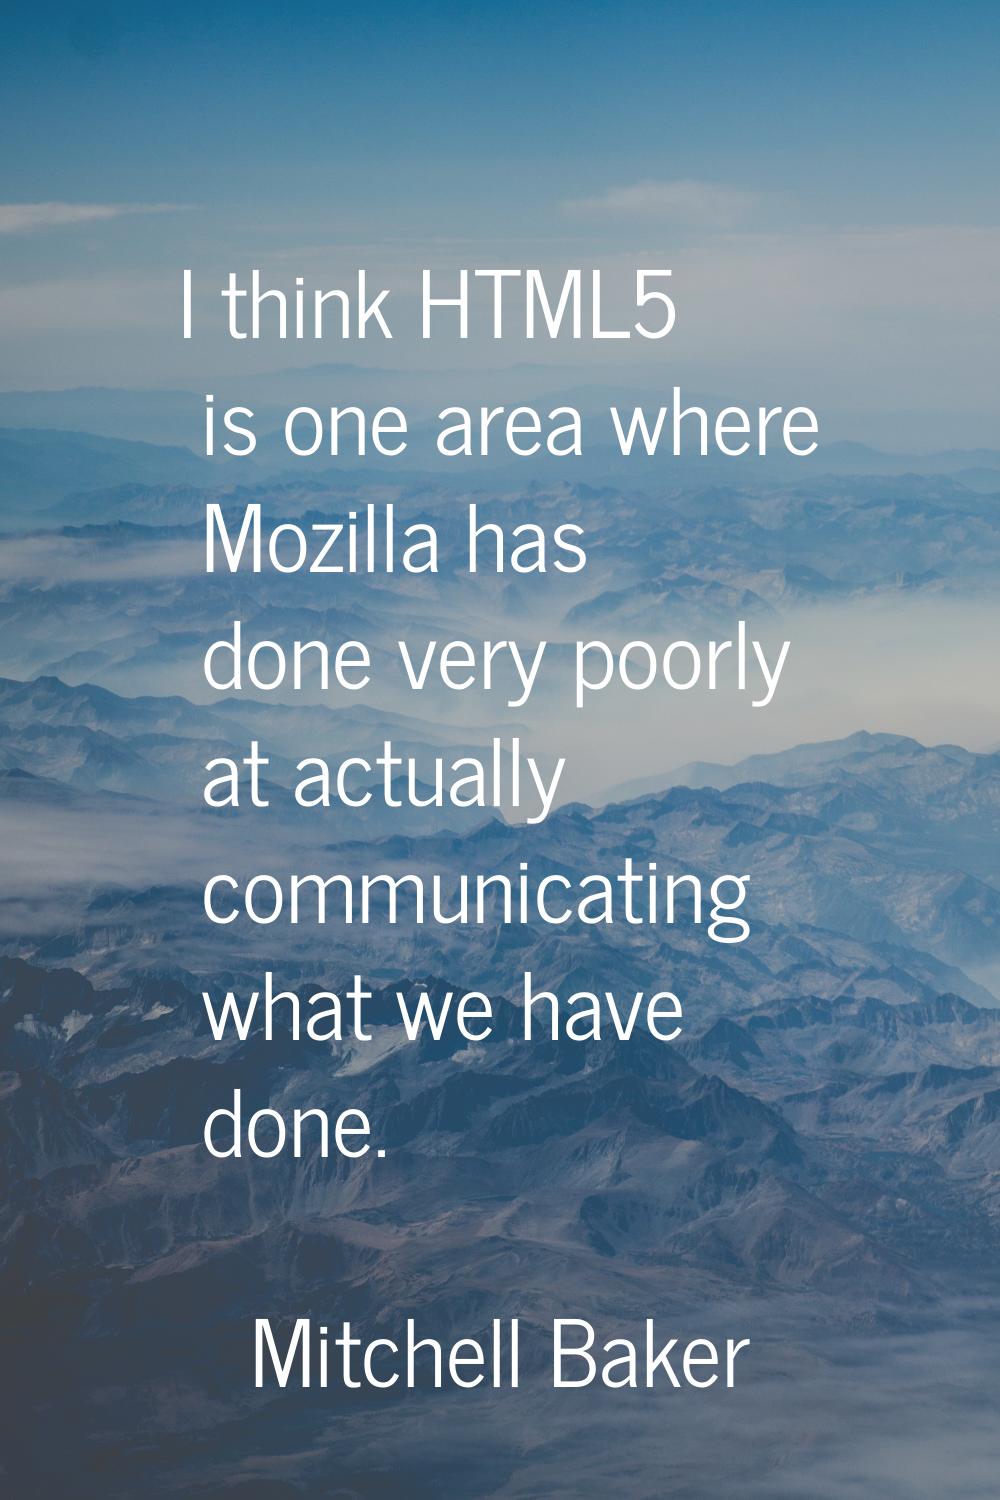 I think HTML5 is one area where Mozilla has done very poorly at actually communicating what we have